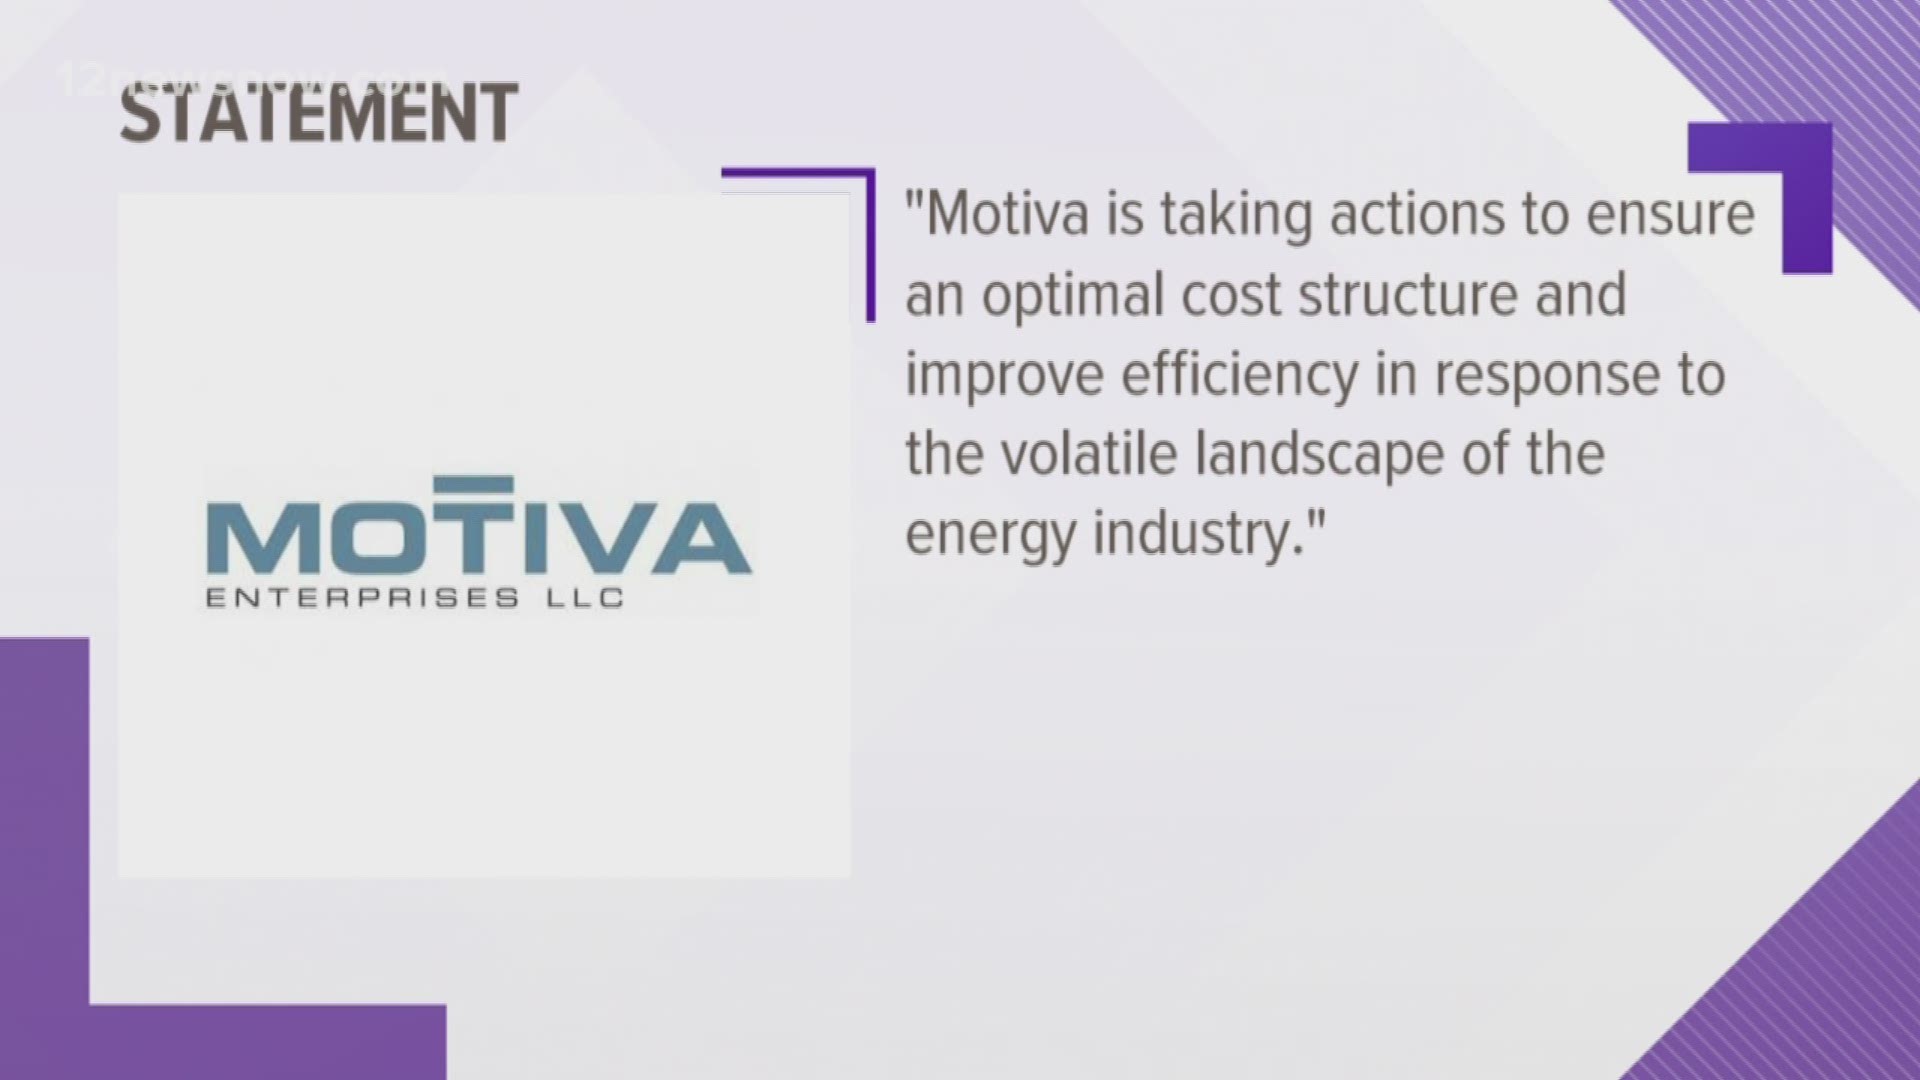 Motiva sent a statement to 12News regarding the cuts due to pandemic.